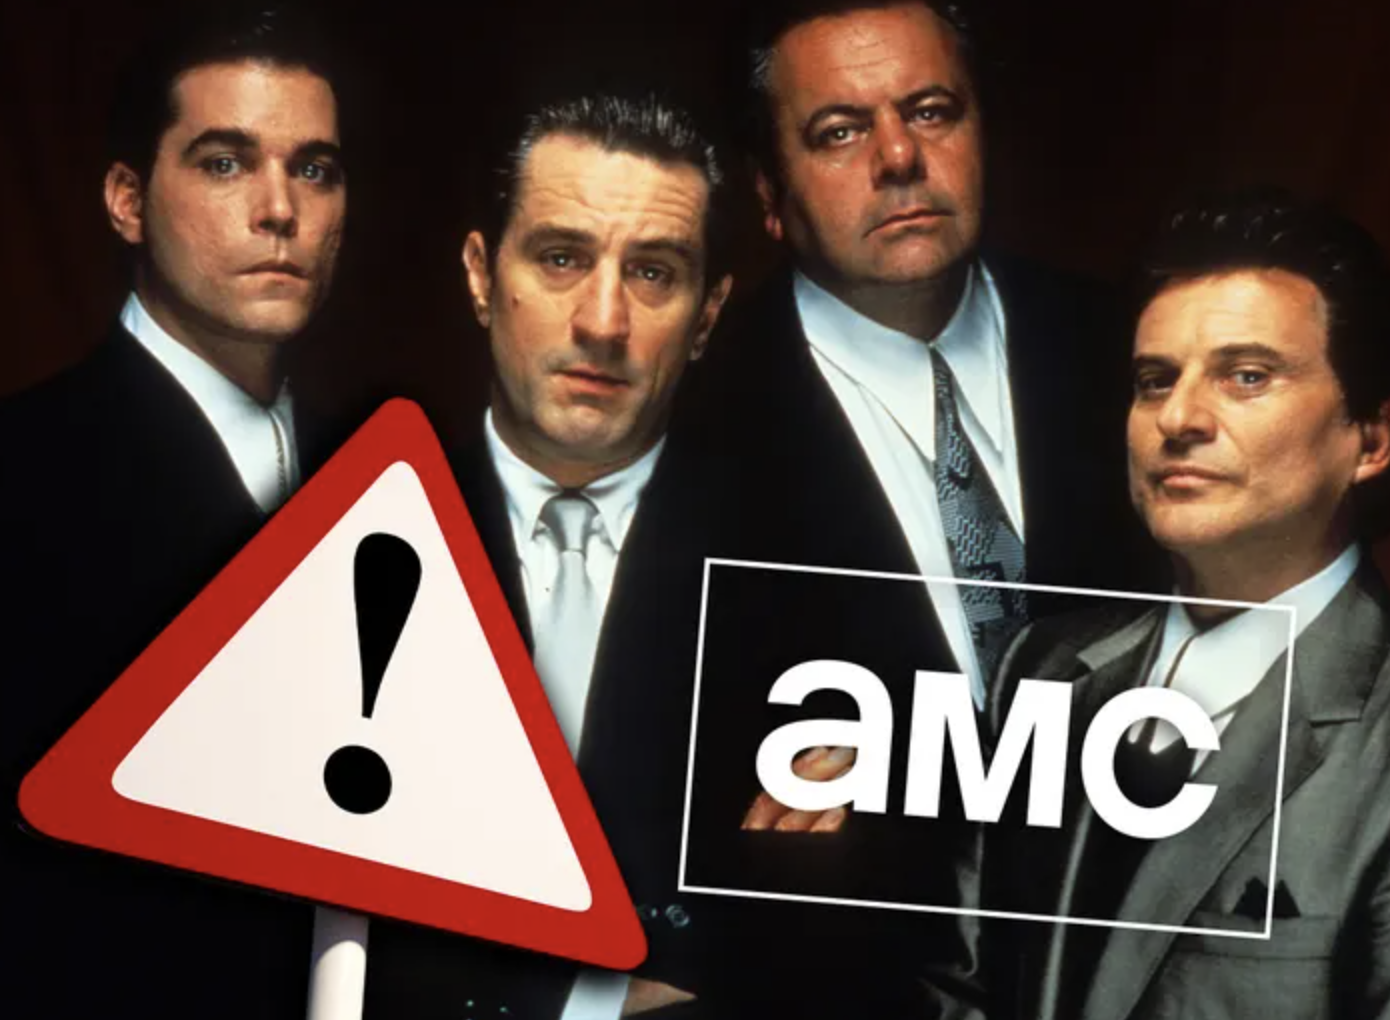 The movie “Godfellas” has been given a trigger warning on AMC…